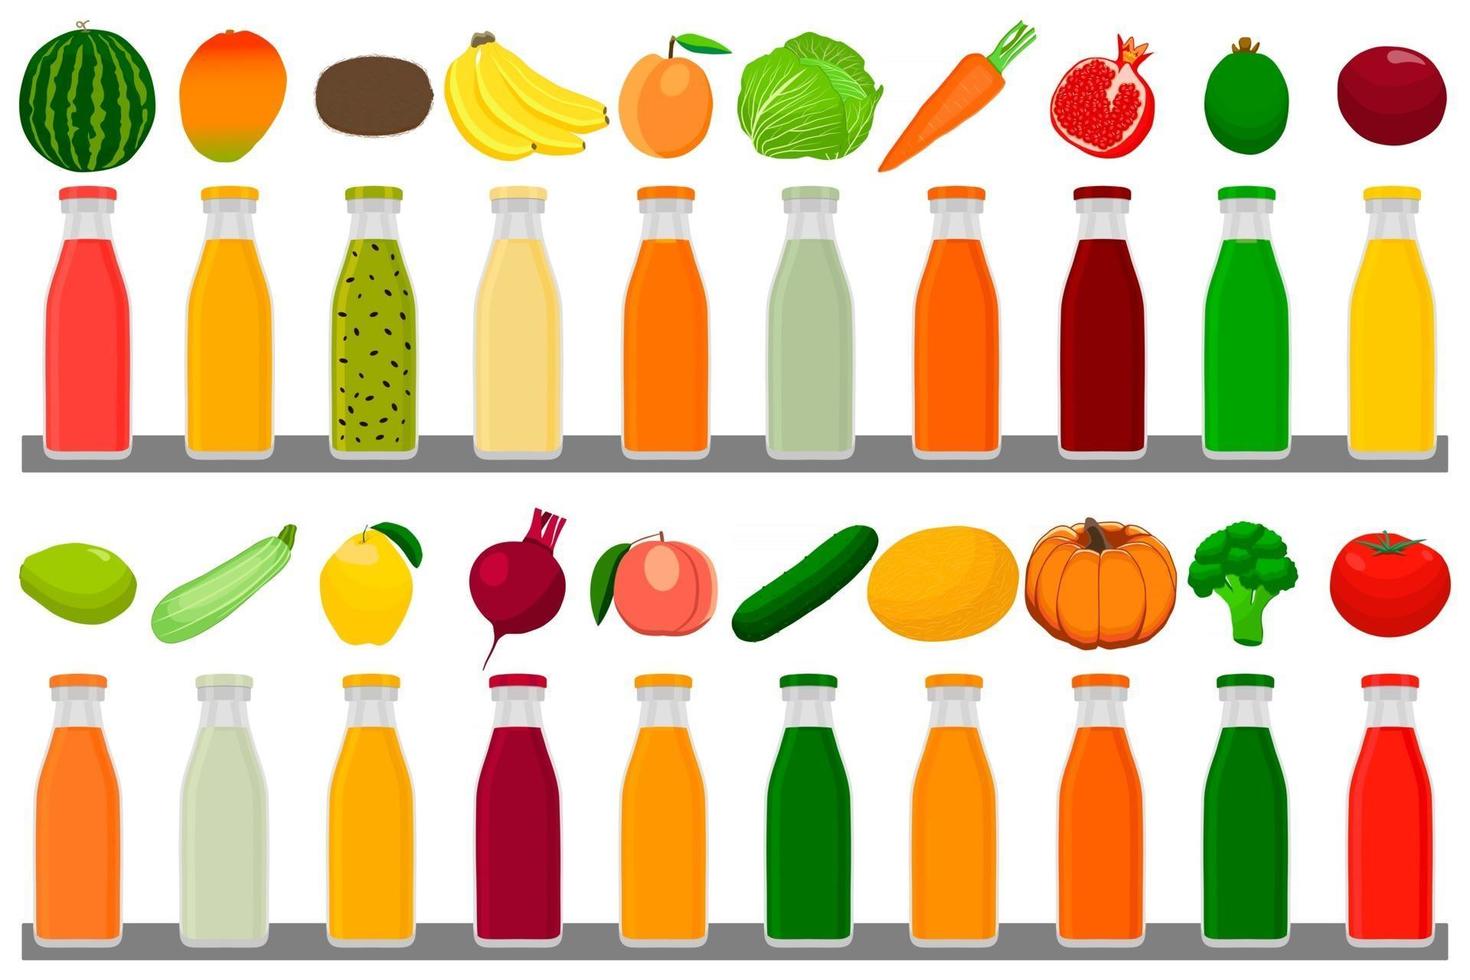 https://static.vecteezy.com/system/resources/previews/002/894/971/non_2x/glass-bottles-with-caps-filled-liquid-multicolored-fruit-juice-vector.jpg